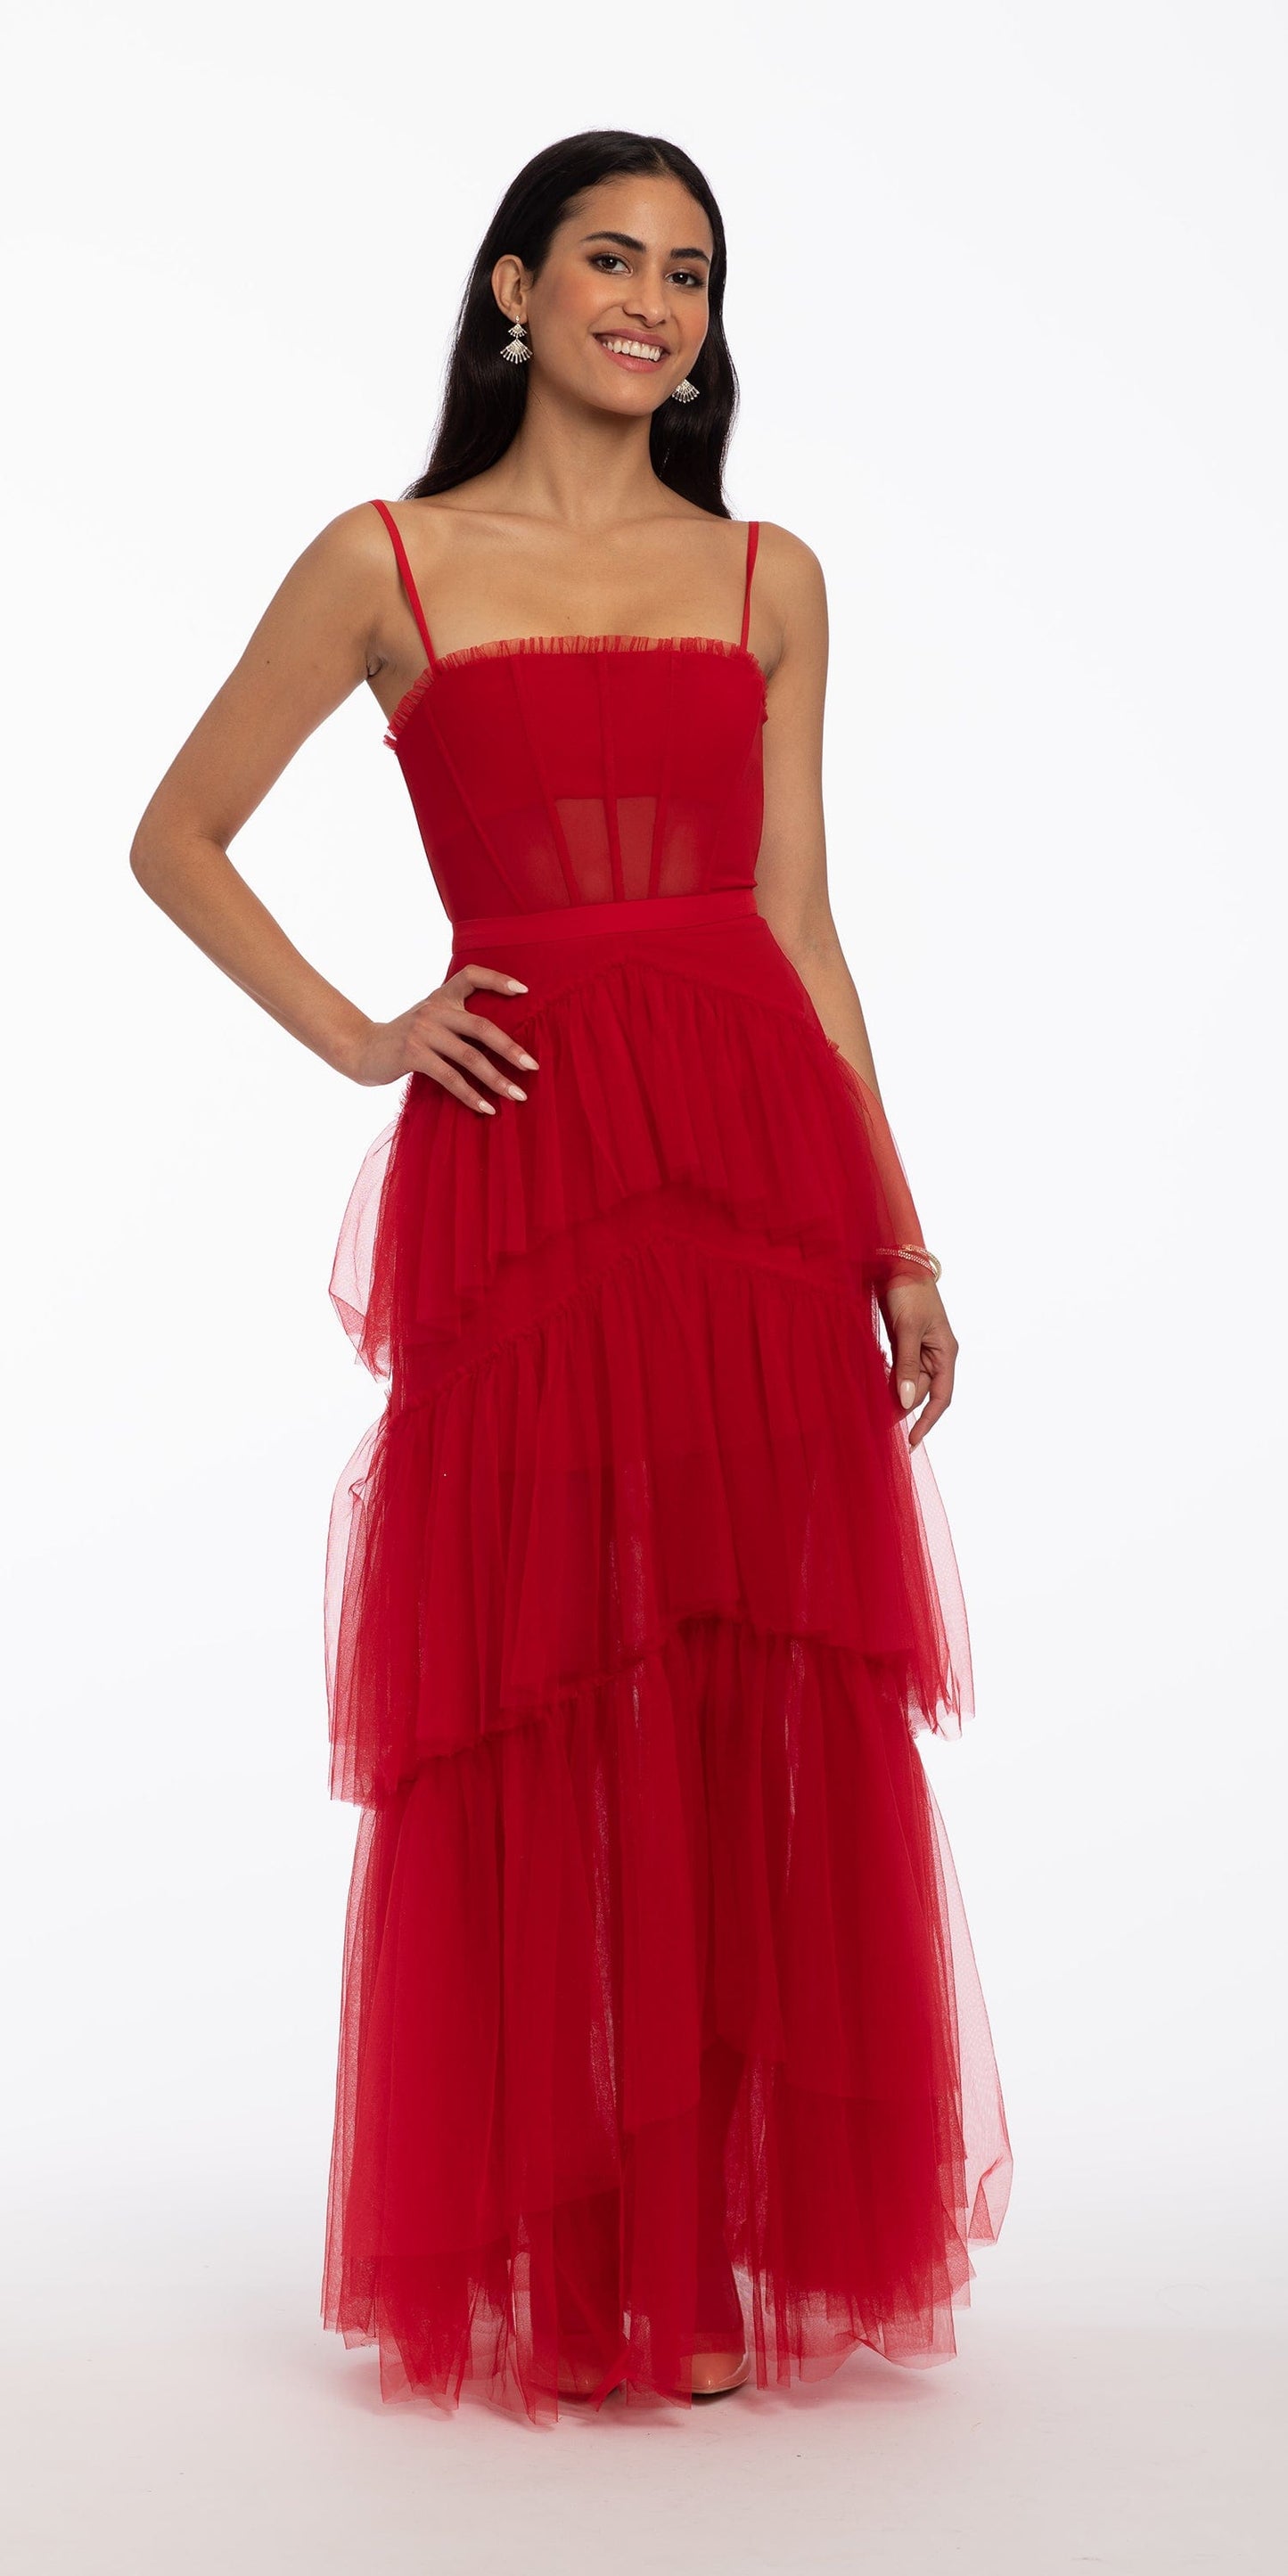 Camille La Vie Sheer Mesh Corset Tiered A Line Dress missy / 6 / red